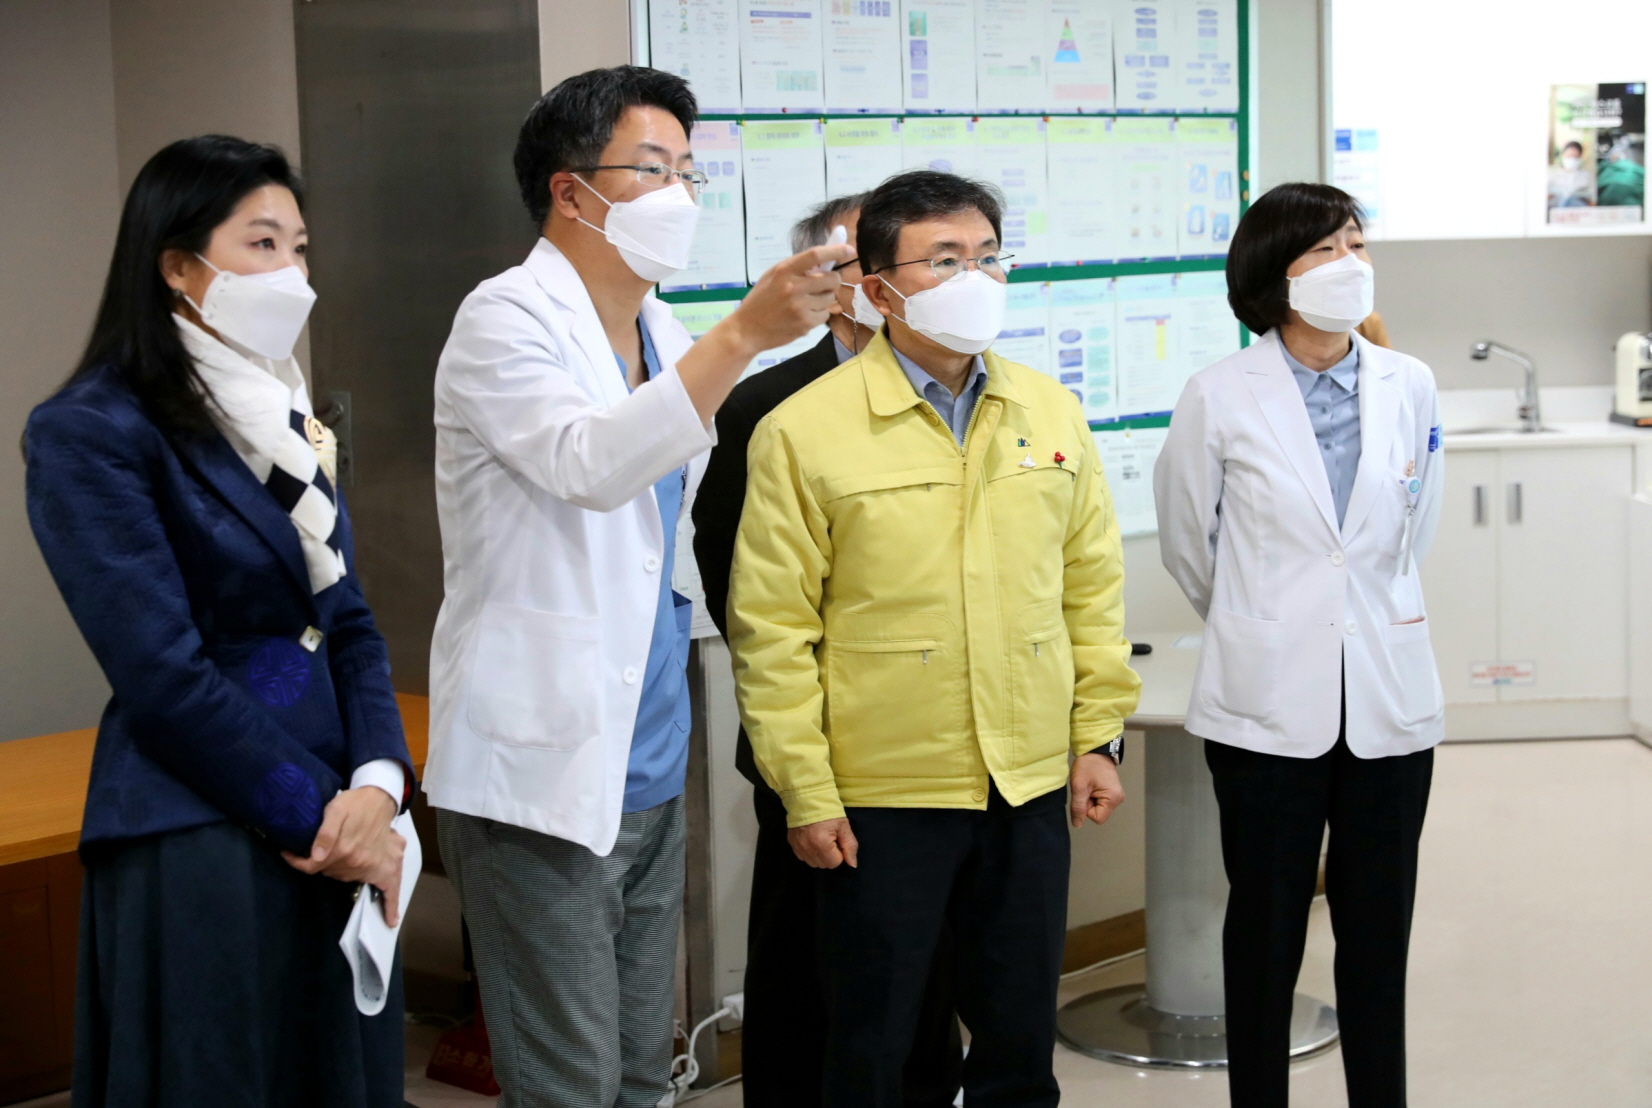 Minister Kwon Checks Hospital Networks in North Gyeonggi for COVID-19 Treatment (January 3) 사진13